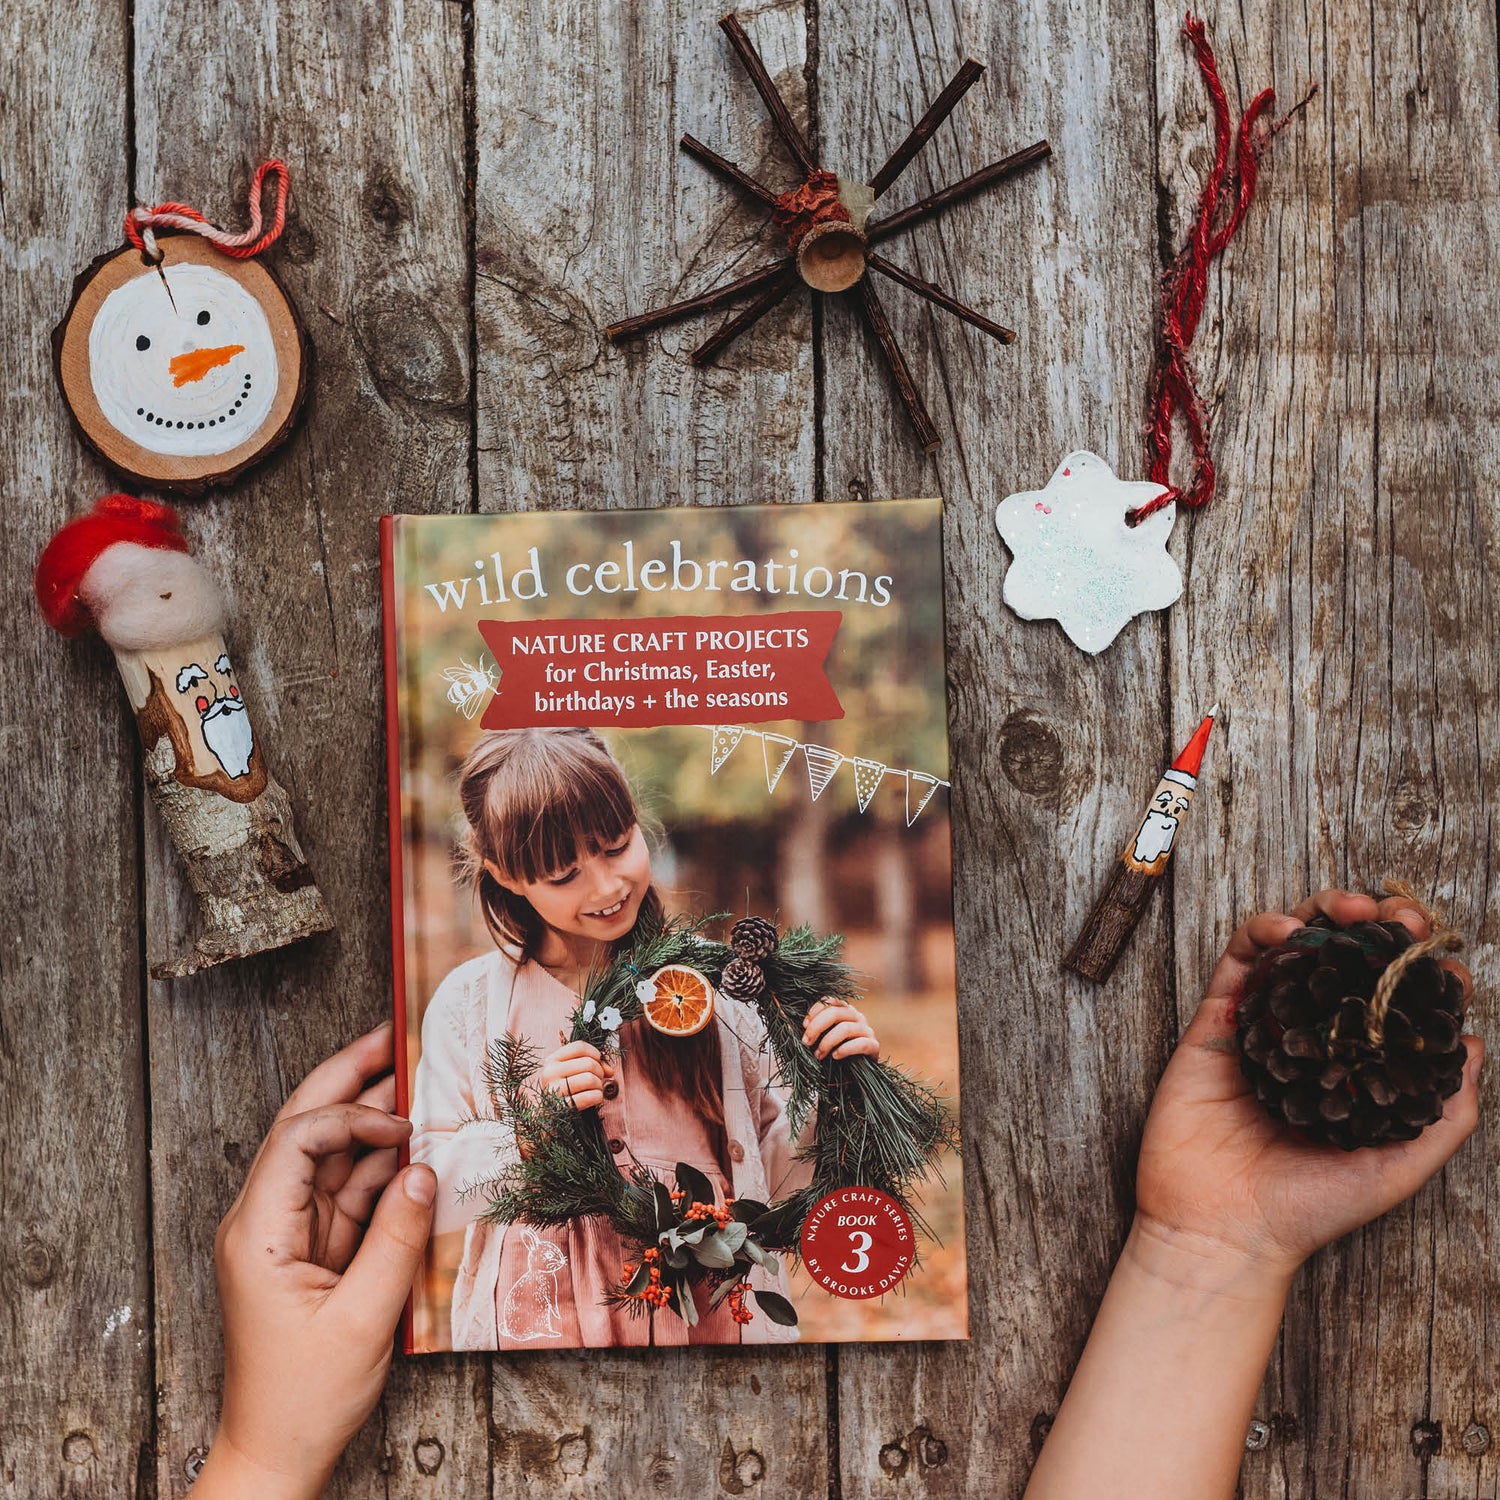 Child holding DIY Christmas decorations made with nature and the book Wild Celebrations from the Nature Craft Series by Your Wild Books is printed in Australia using FSC Certified paper.